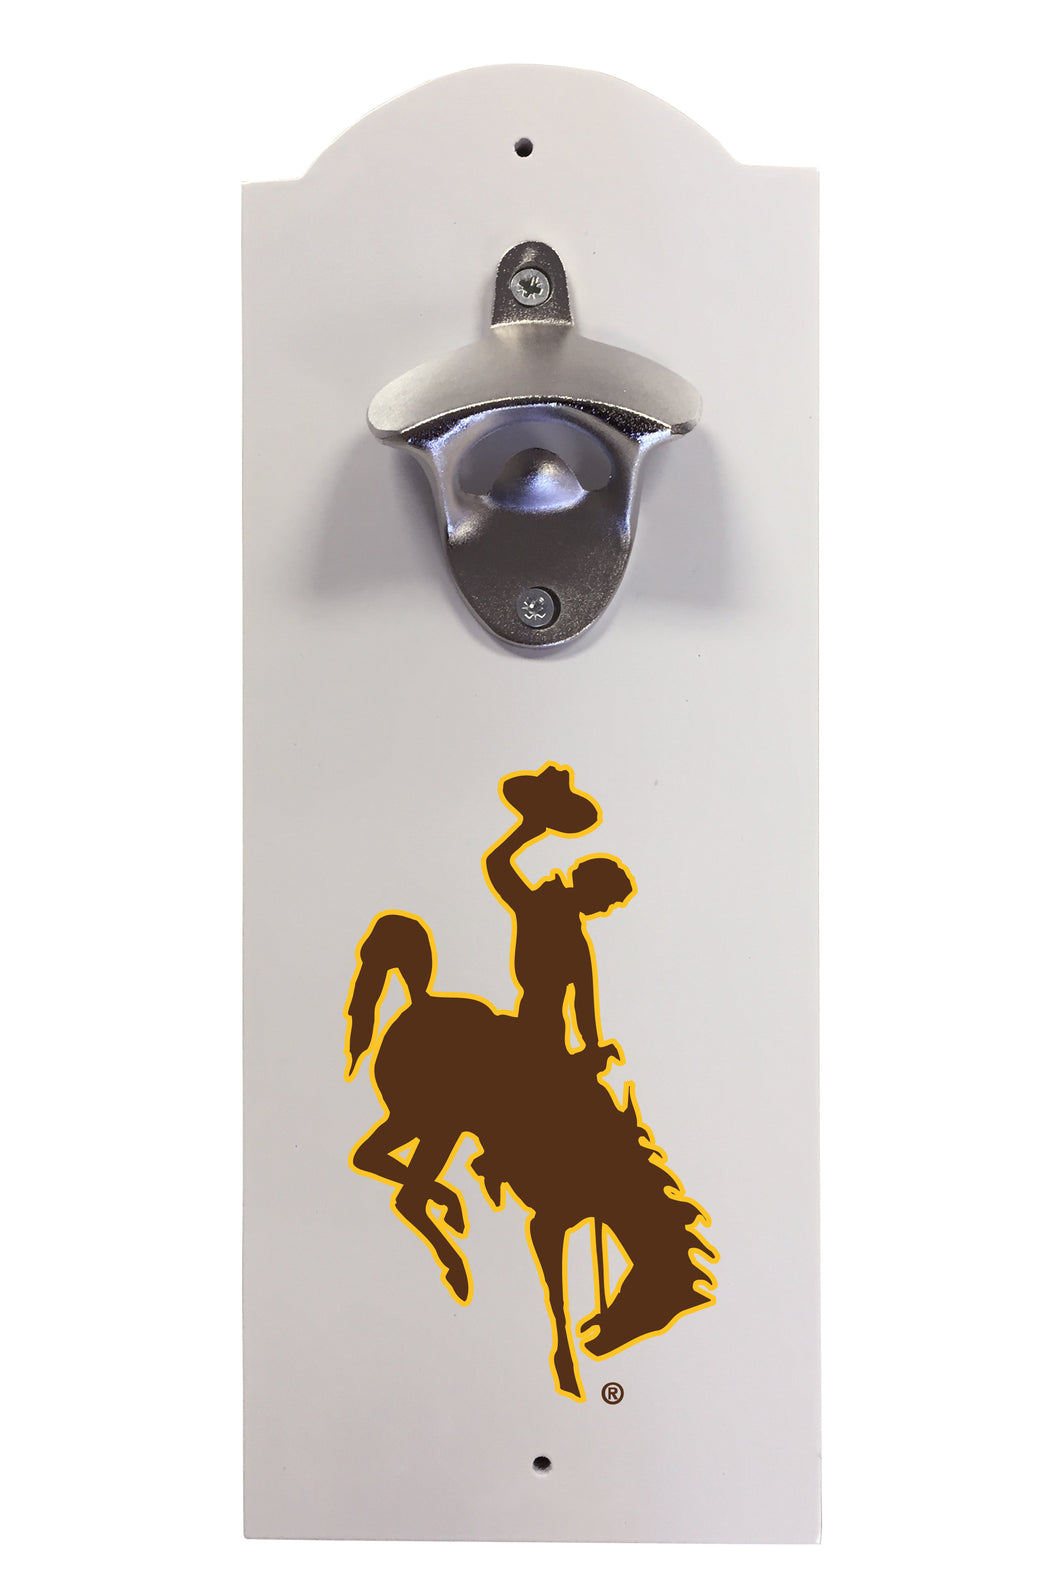 University of Wyoming Wall-Mounted Bottle Opener – Sturdy Metal with Decorative Wood Base for Home Bars, Rec Rooms & Fan Caves